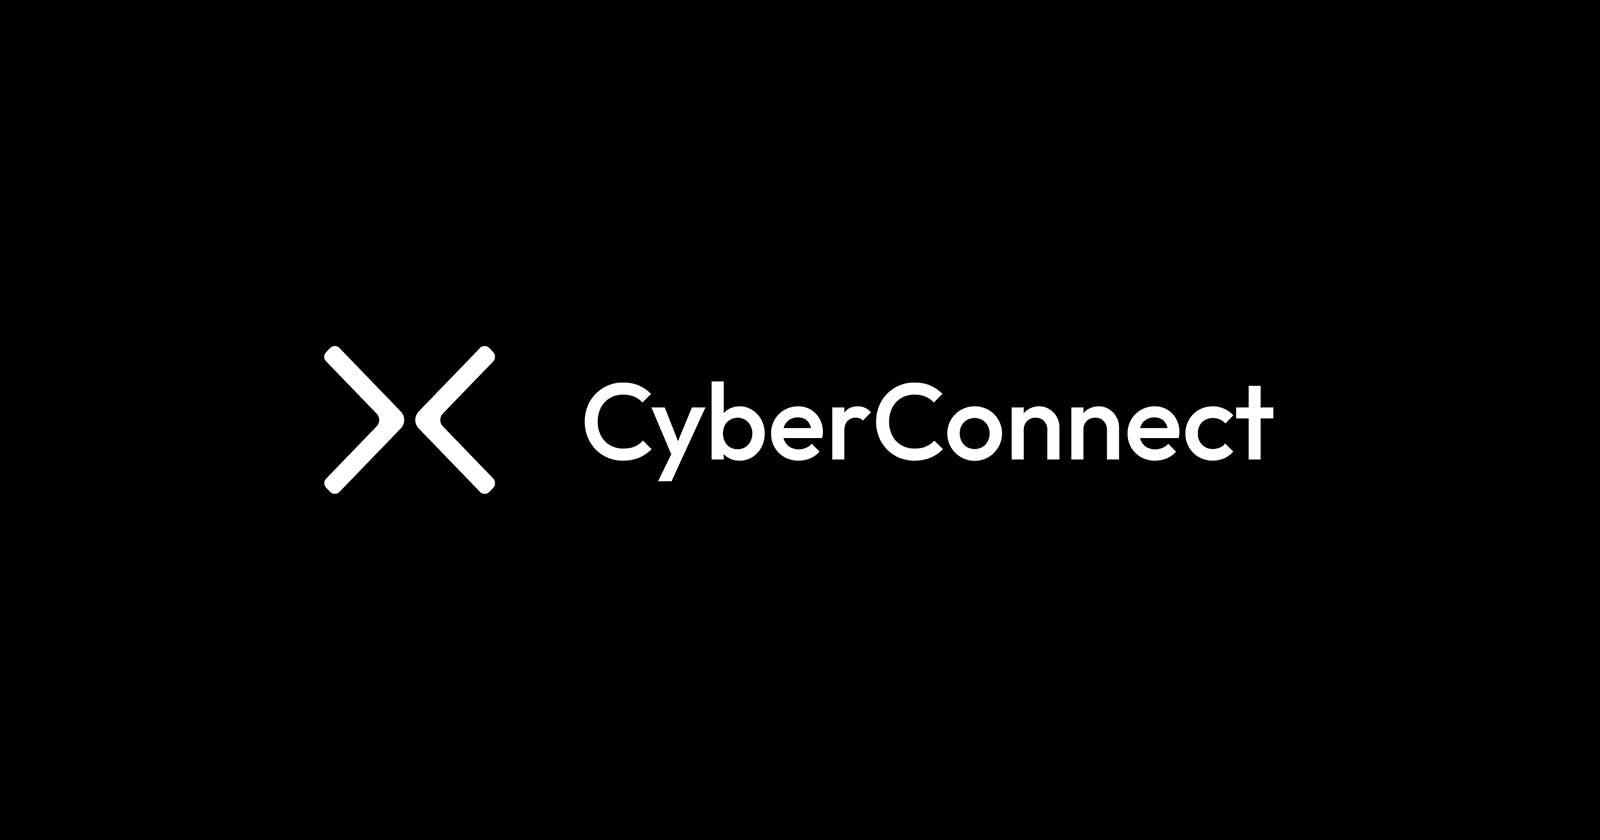 Getting Started with CyberConnect